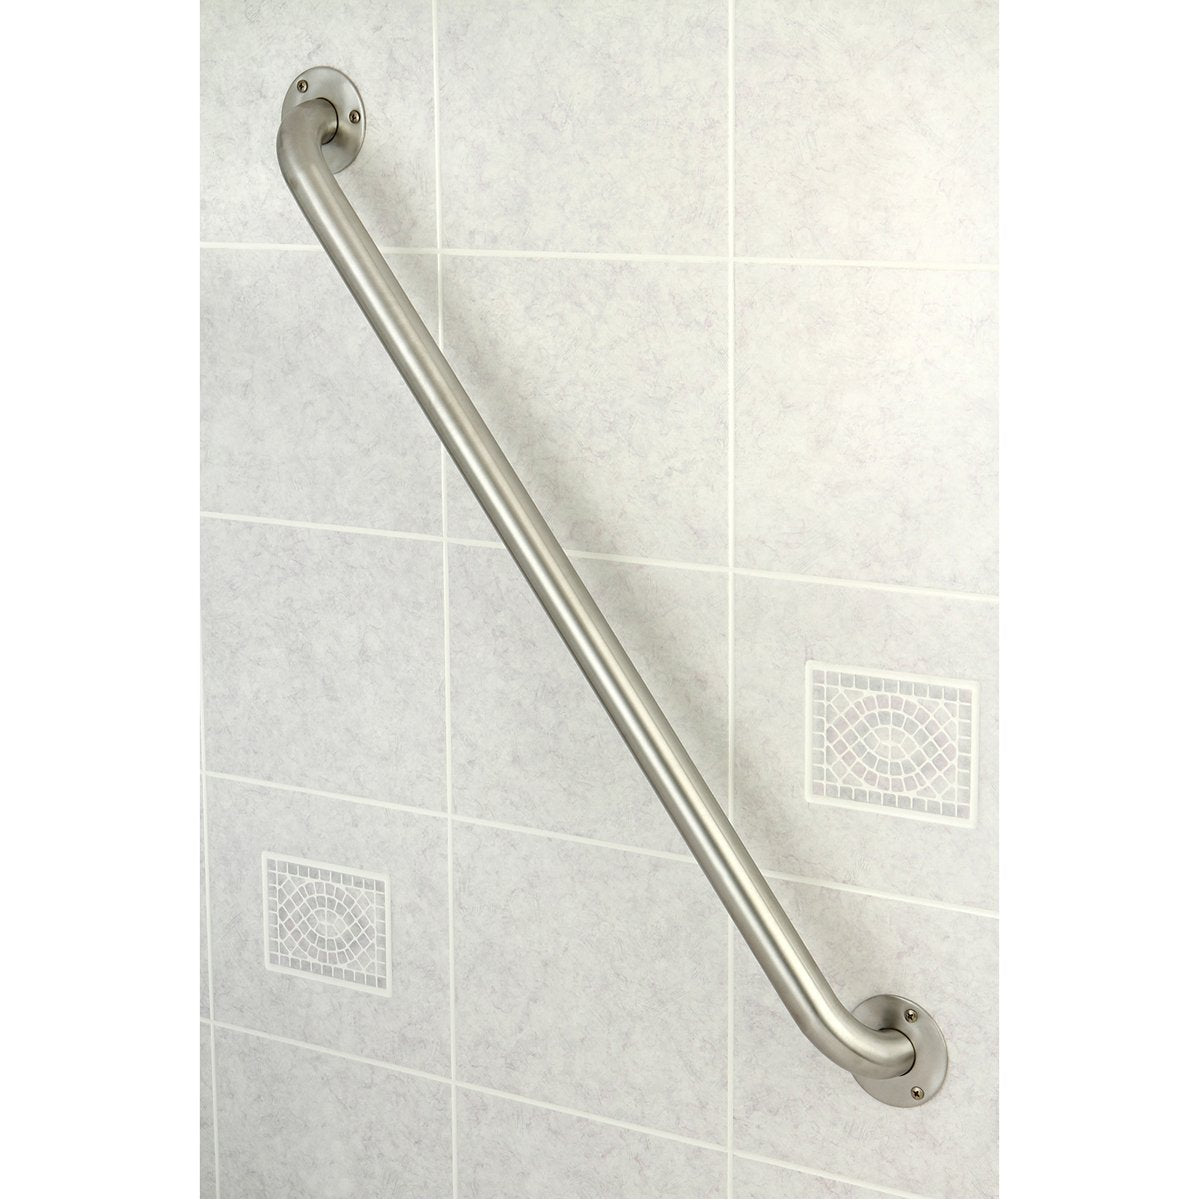 Kingston Brass Made to Match Commercial Grade Satin Nickel Grab Bar-Exposed Screws-Bathroom Accessories-Free Shipping-Directsinks.